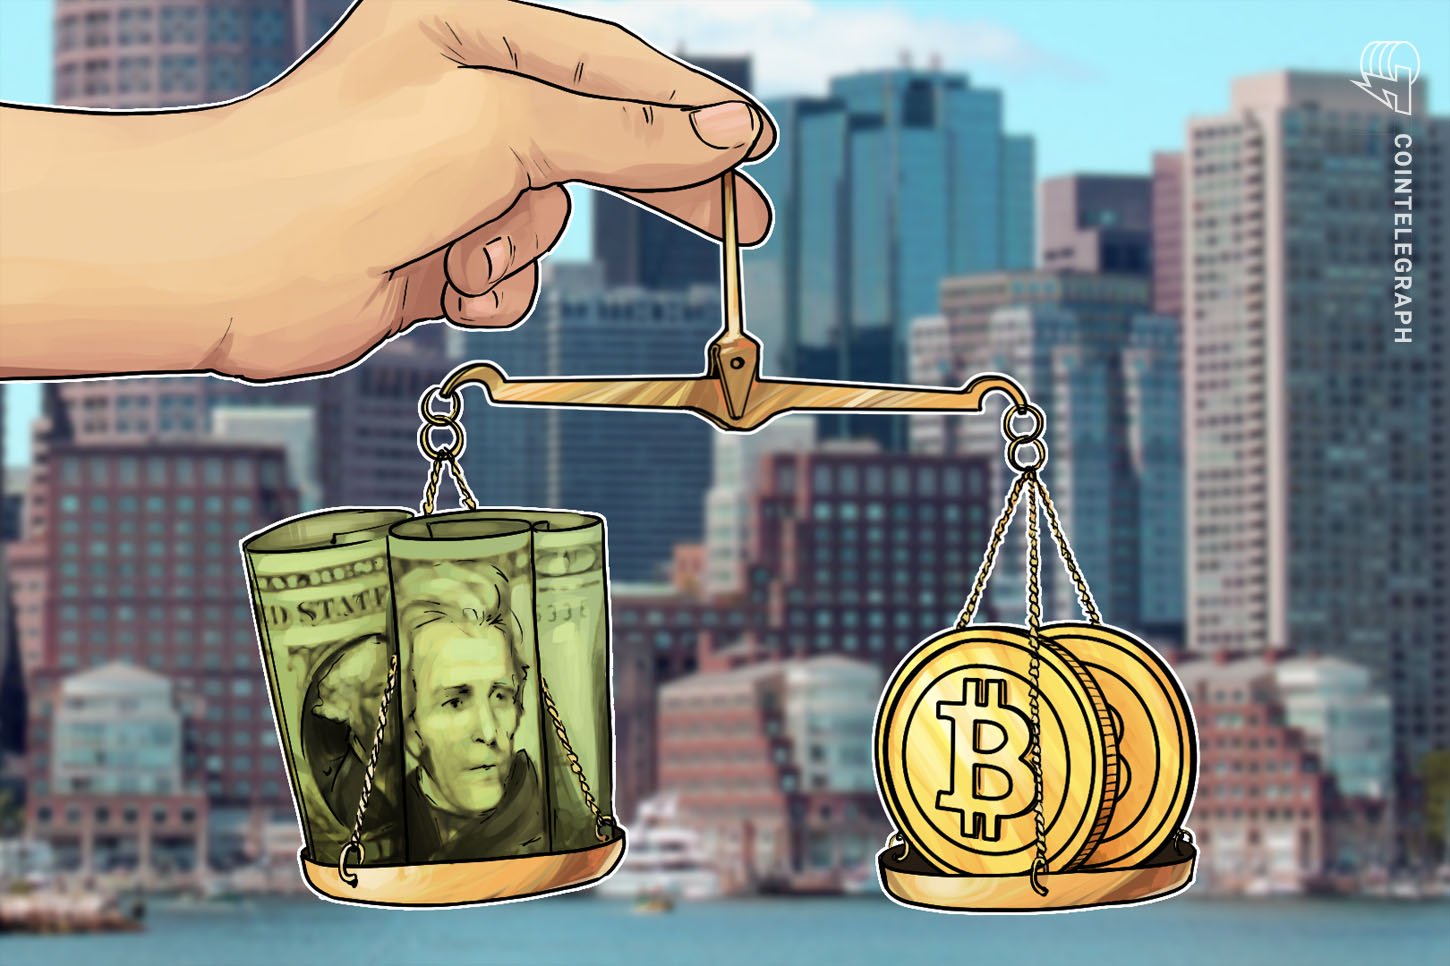 Fiat Faces Bitcoin ‘Flattening’ as Covid-19 Sends M2 Provide Over $18T